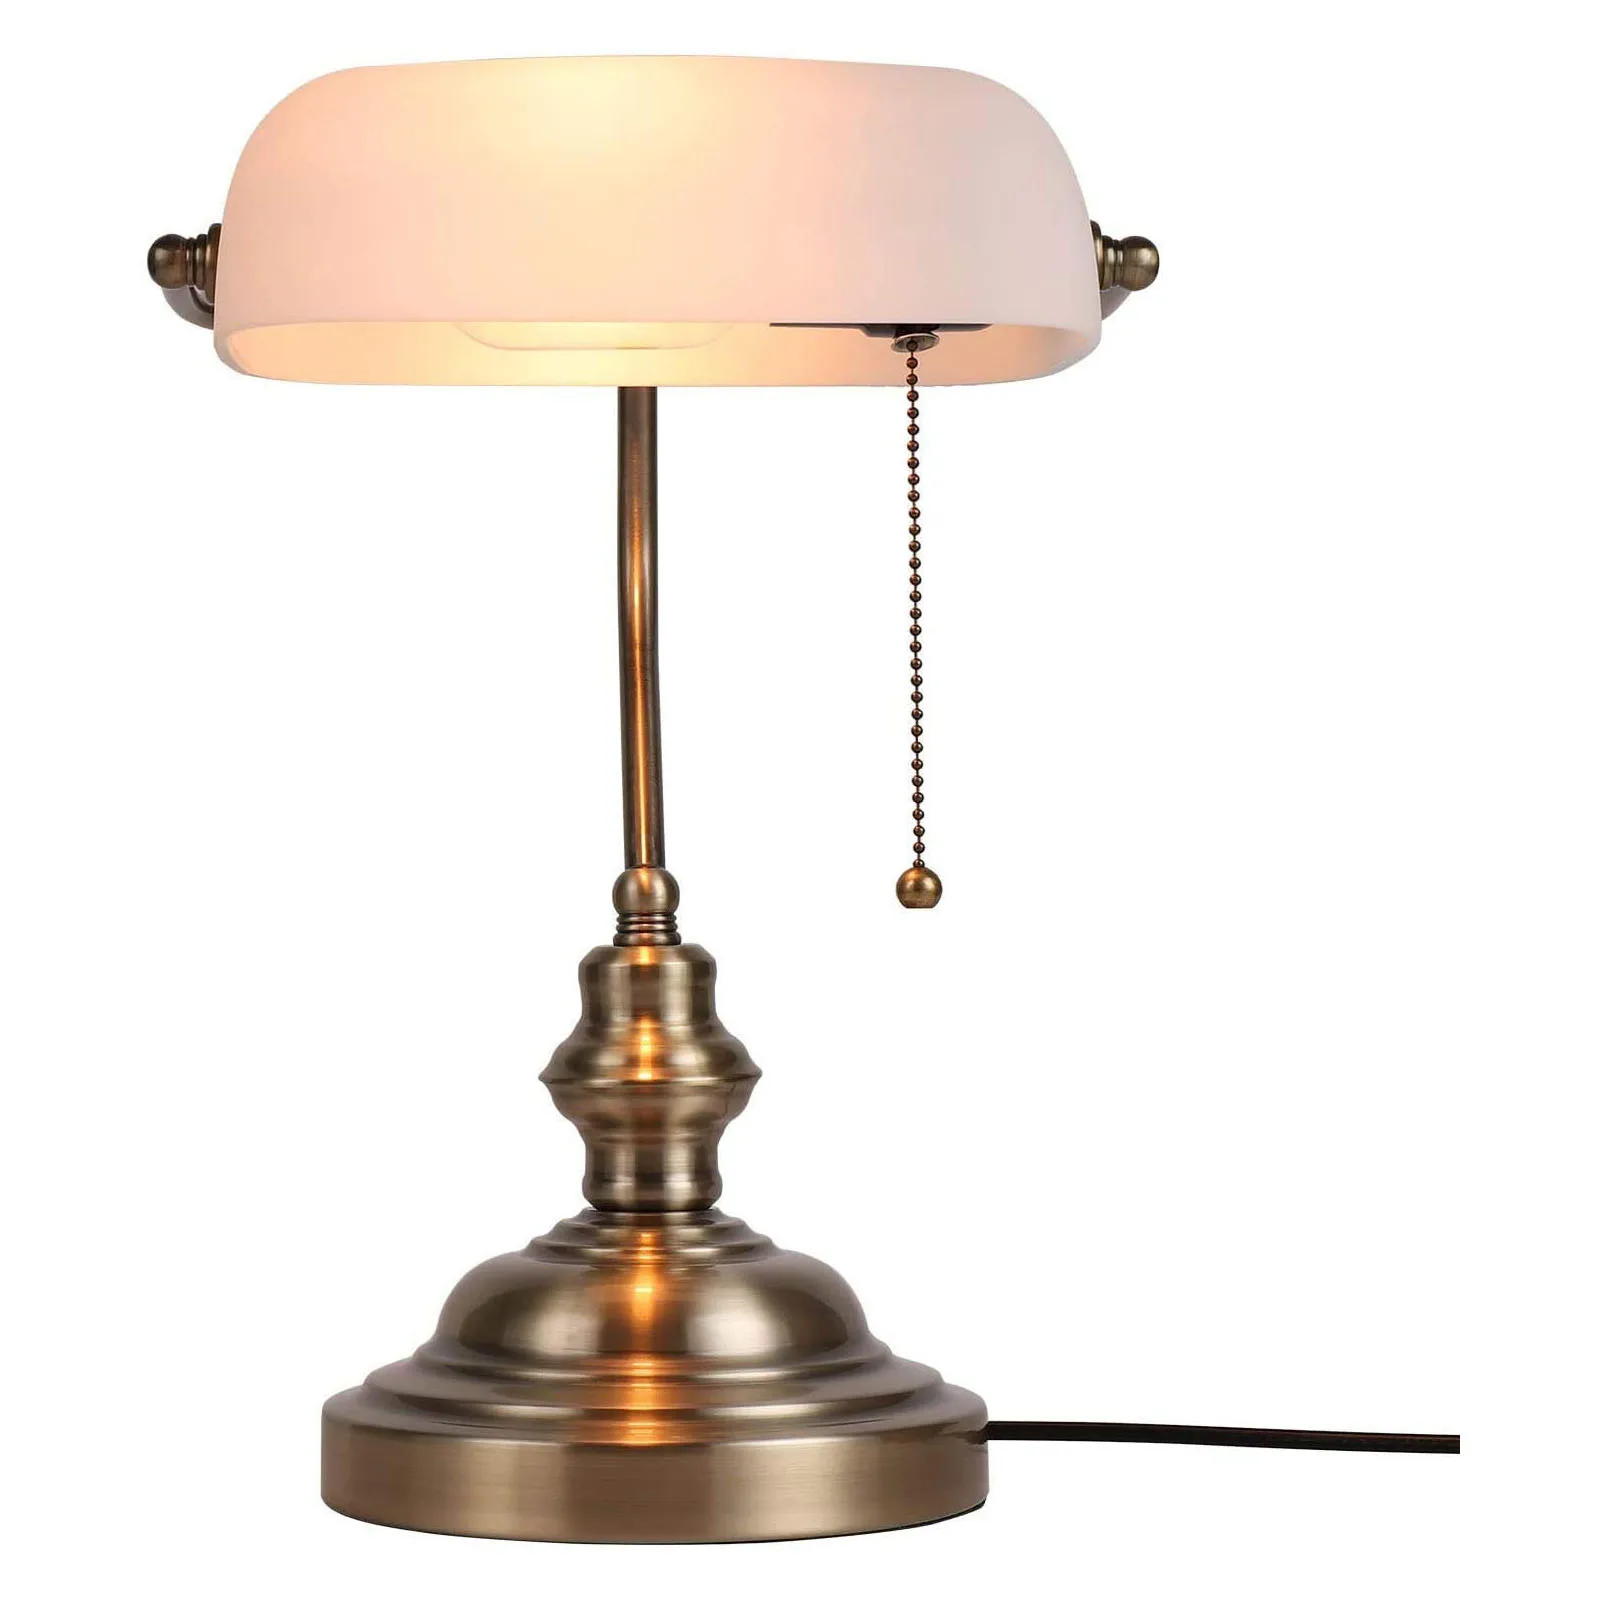 Classic Retro Bankers Lamp Table Lamps Traditional Pull Chain Switch Brass Finish Antique Desk Lamp for Home Office Bedroom